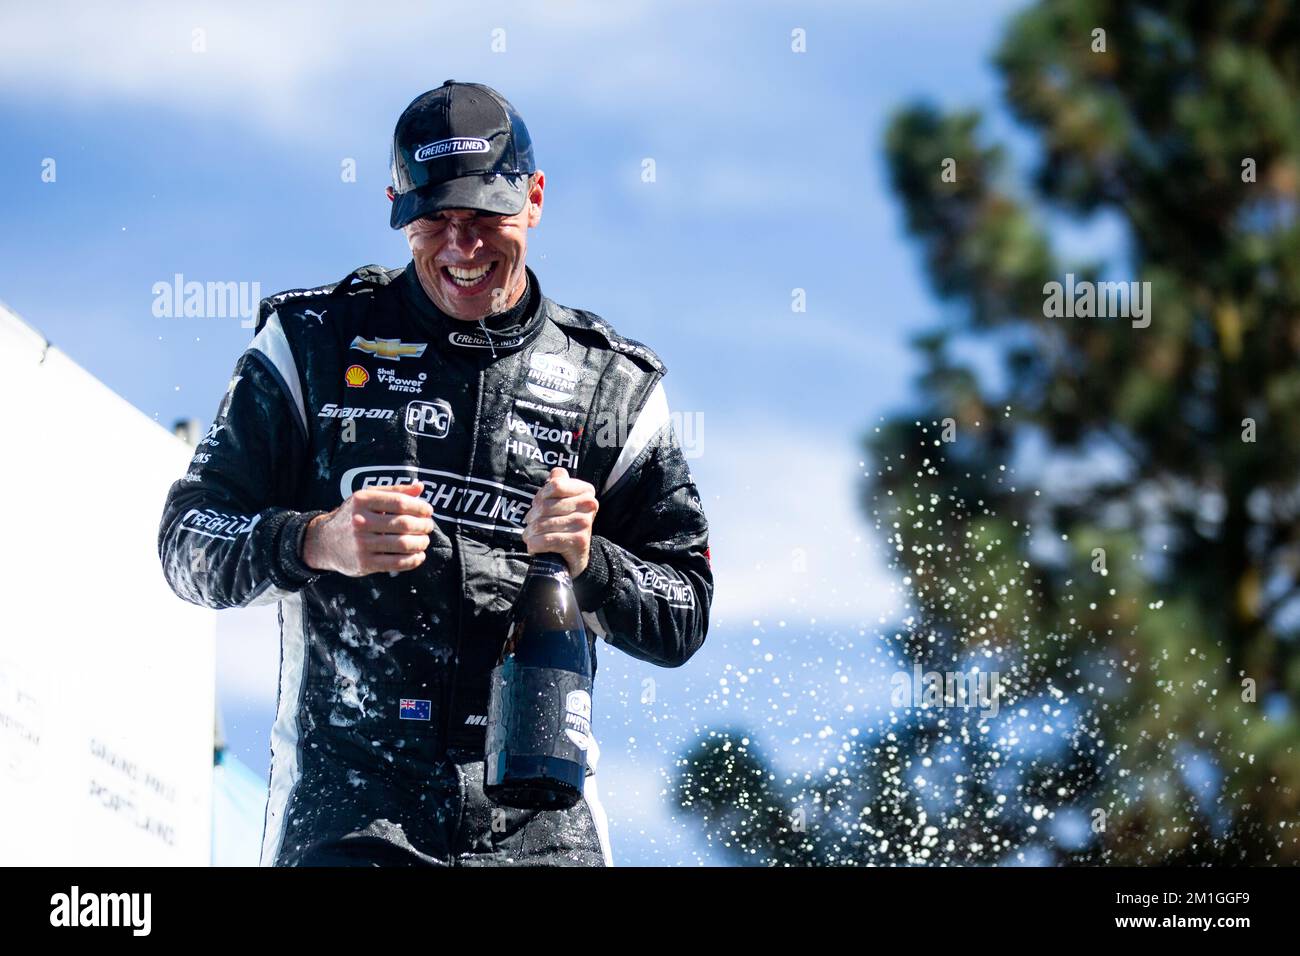 SCOTT MCLAUGHLIN (3) of Christchurch, New Zealand celebrates in Victory Lane after the Grand Prix of Portland at Portland International Raceway in Portland, OR, USA. Stock Photo